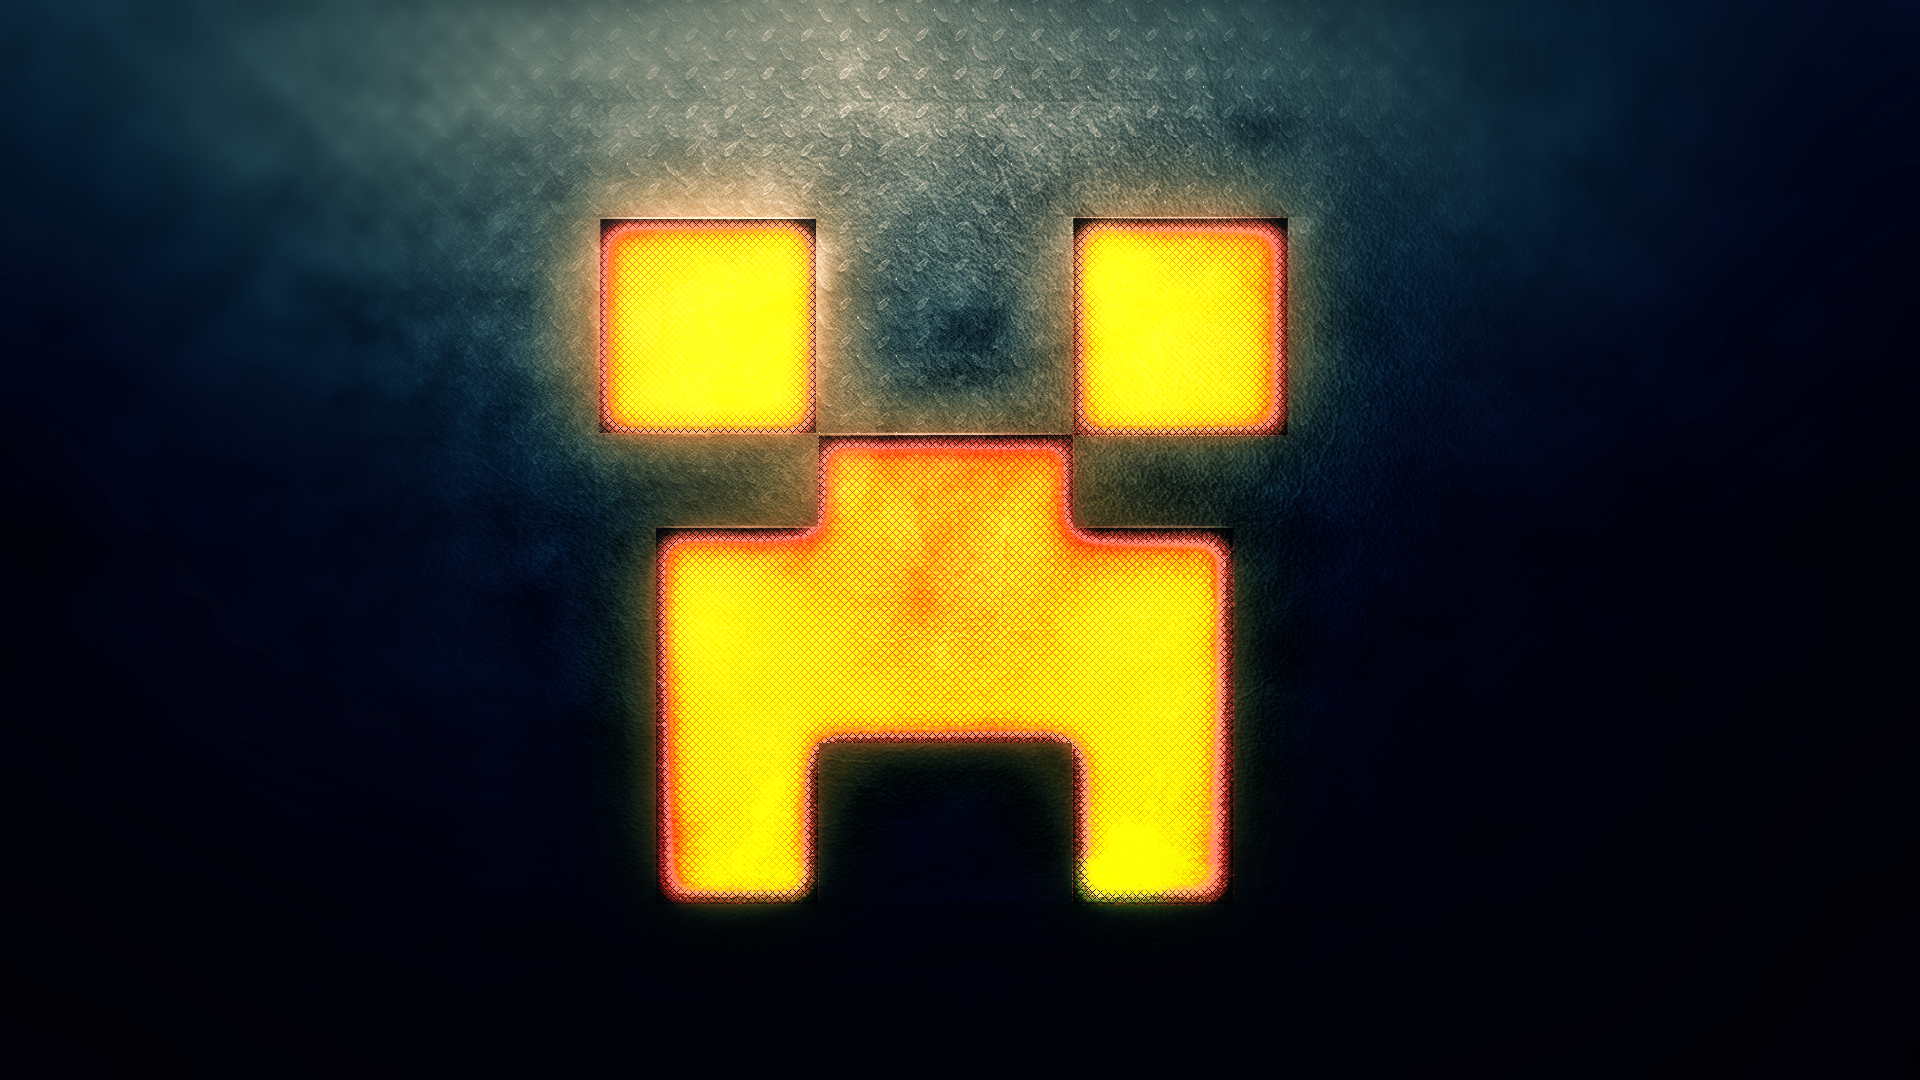 Burning Creeper By Clutchsky